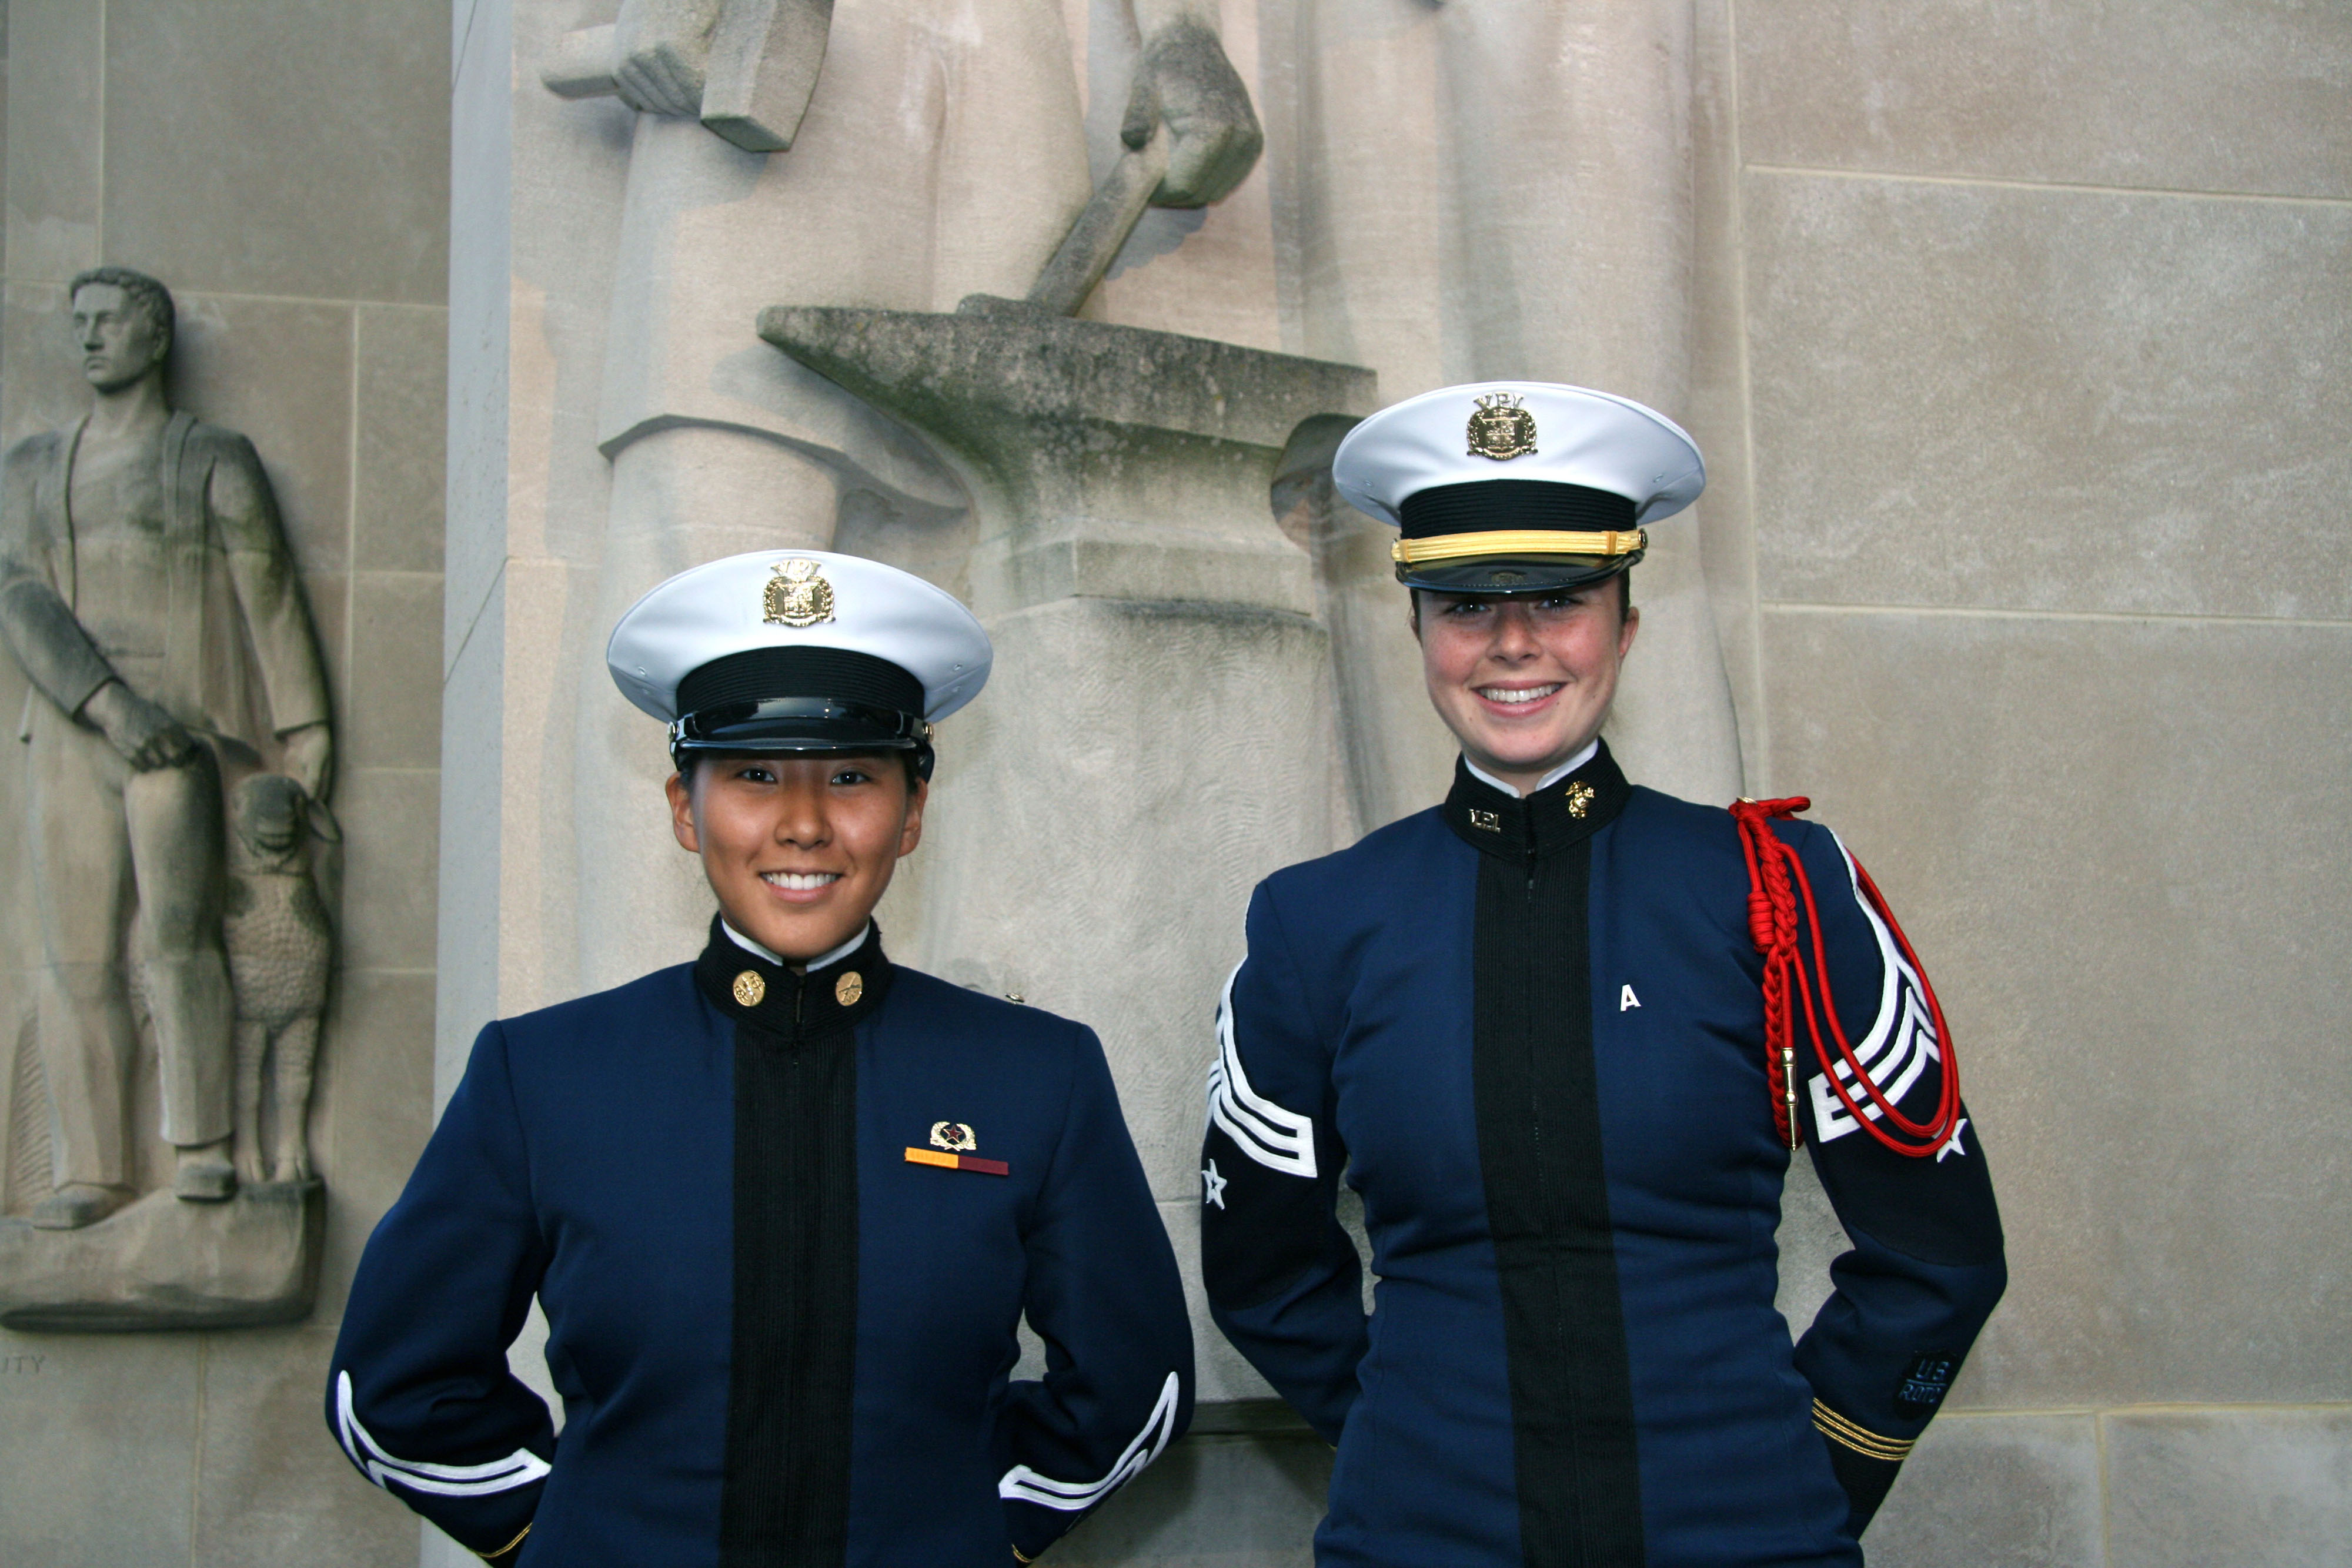 From left to right are Cadets Lydia Choi and Christina Devereux